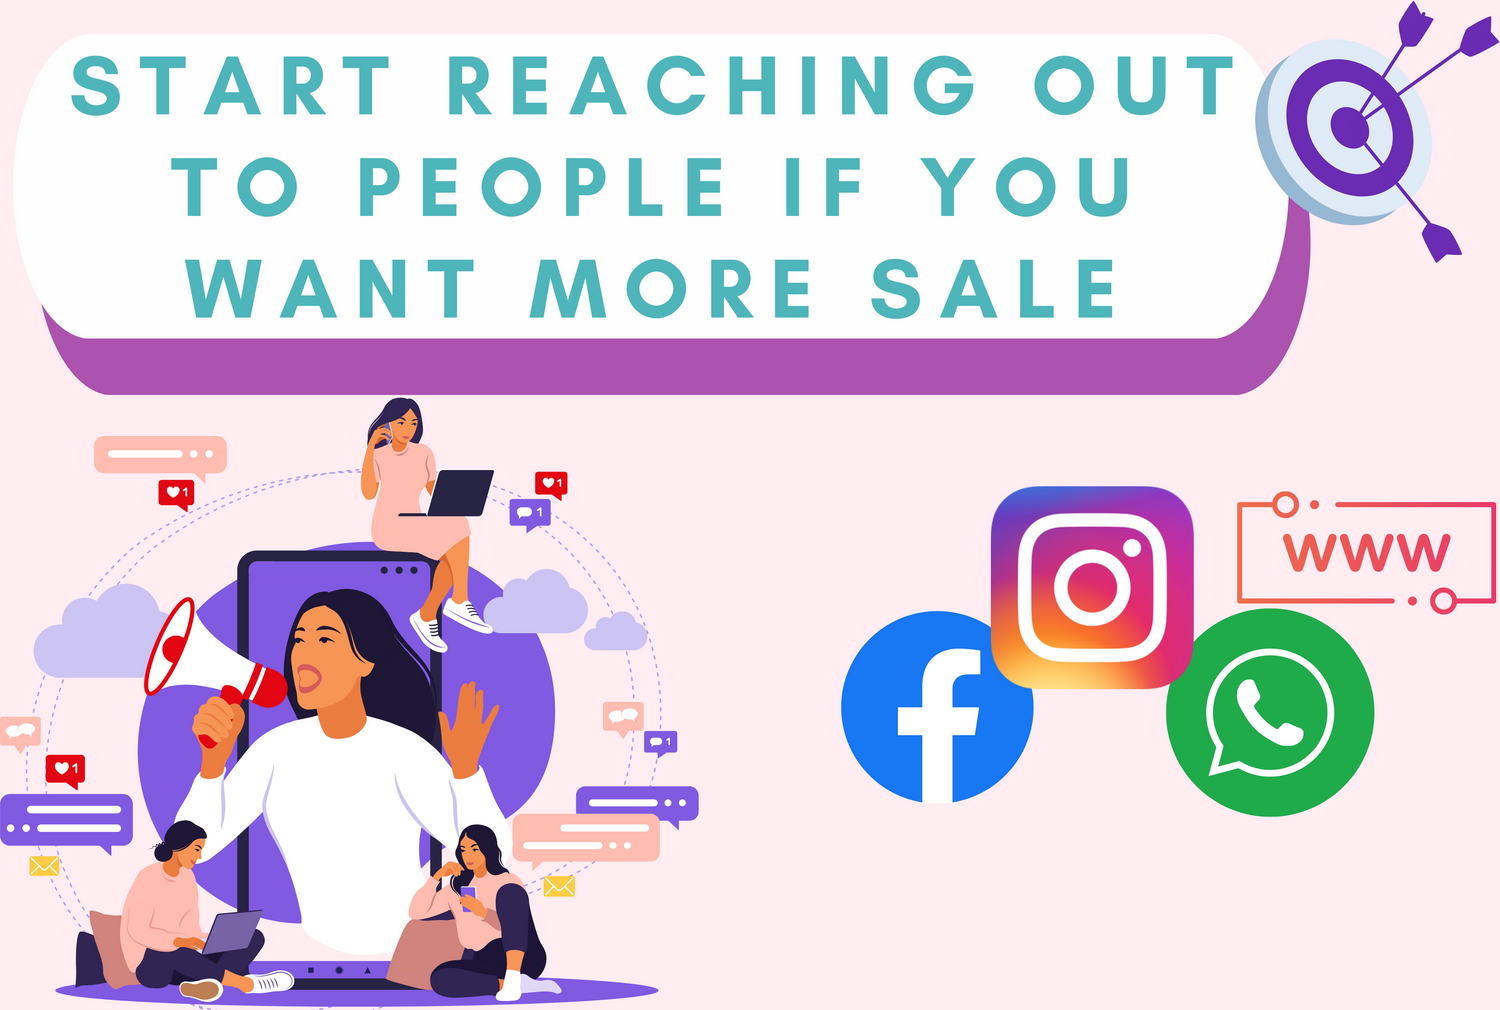 Start reaching out to people if you want more sales